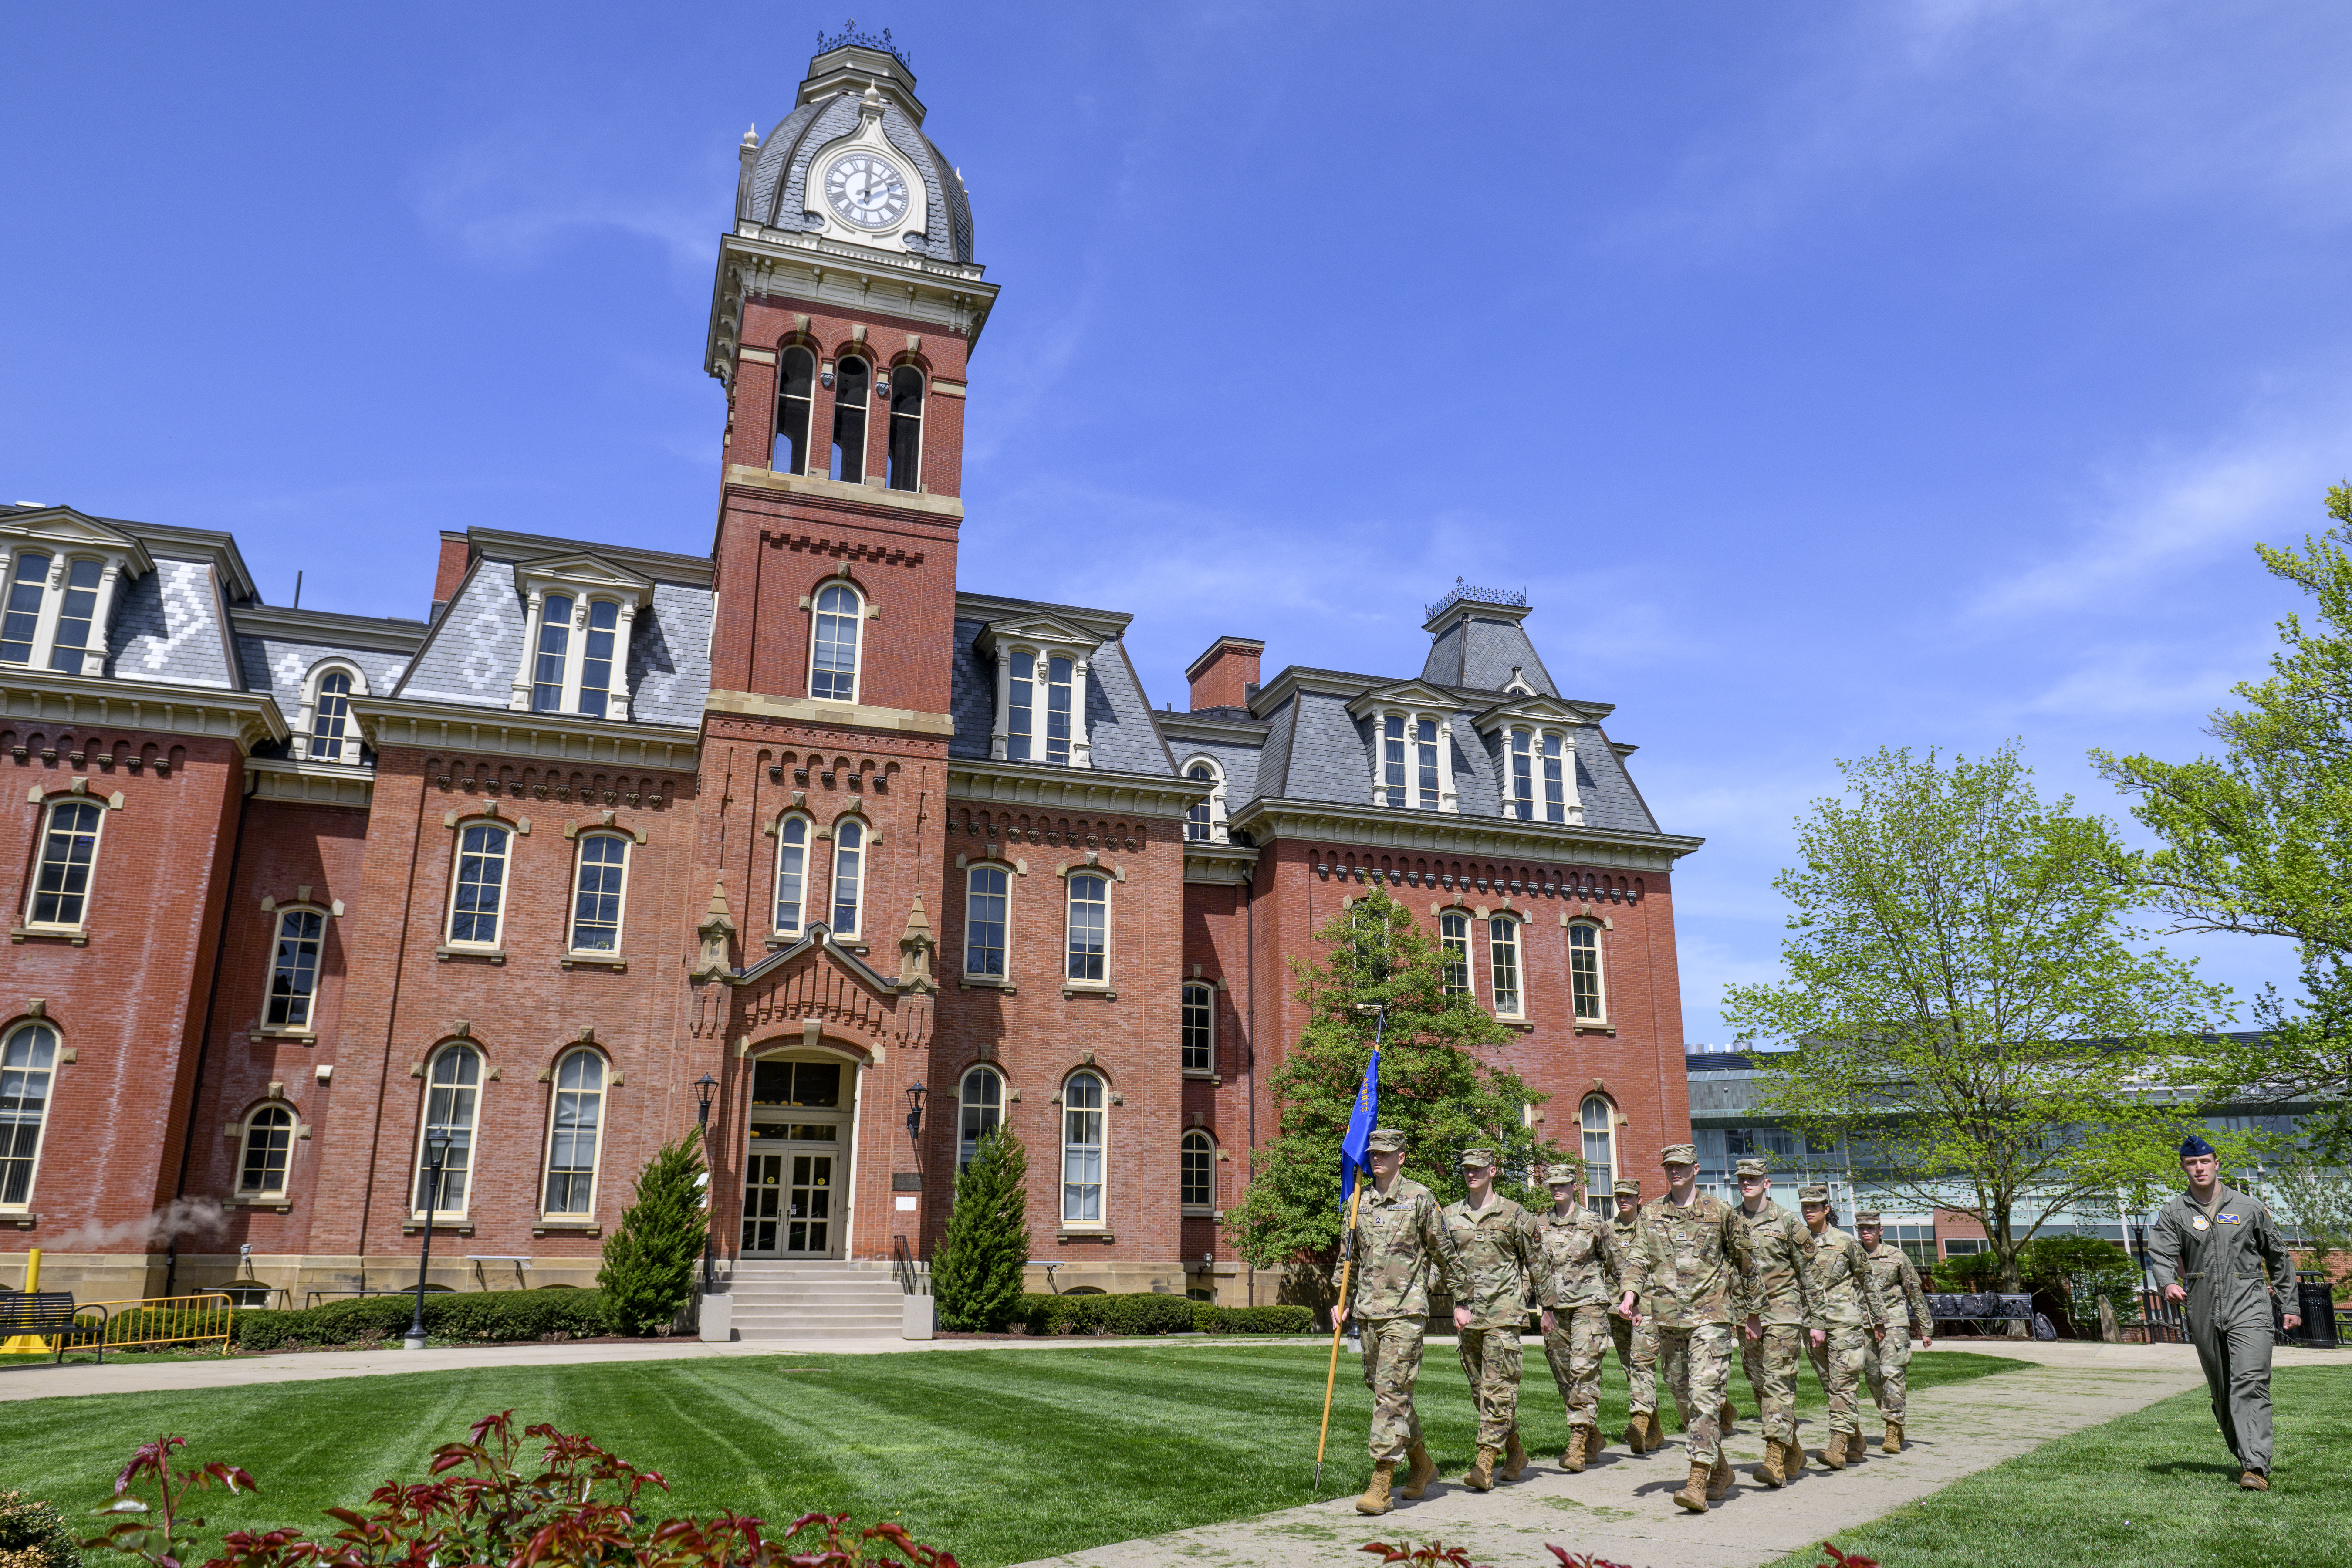 An Air Force team lines up at woodburn hall